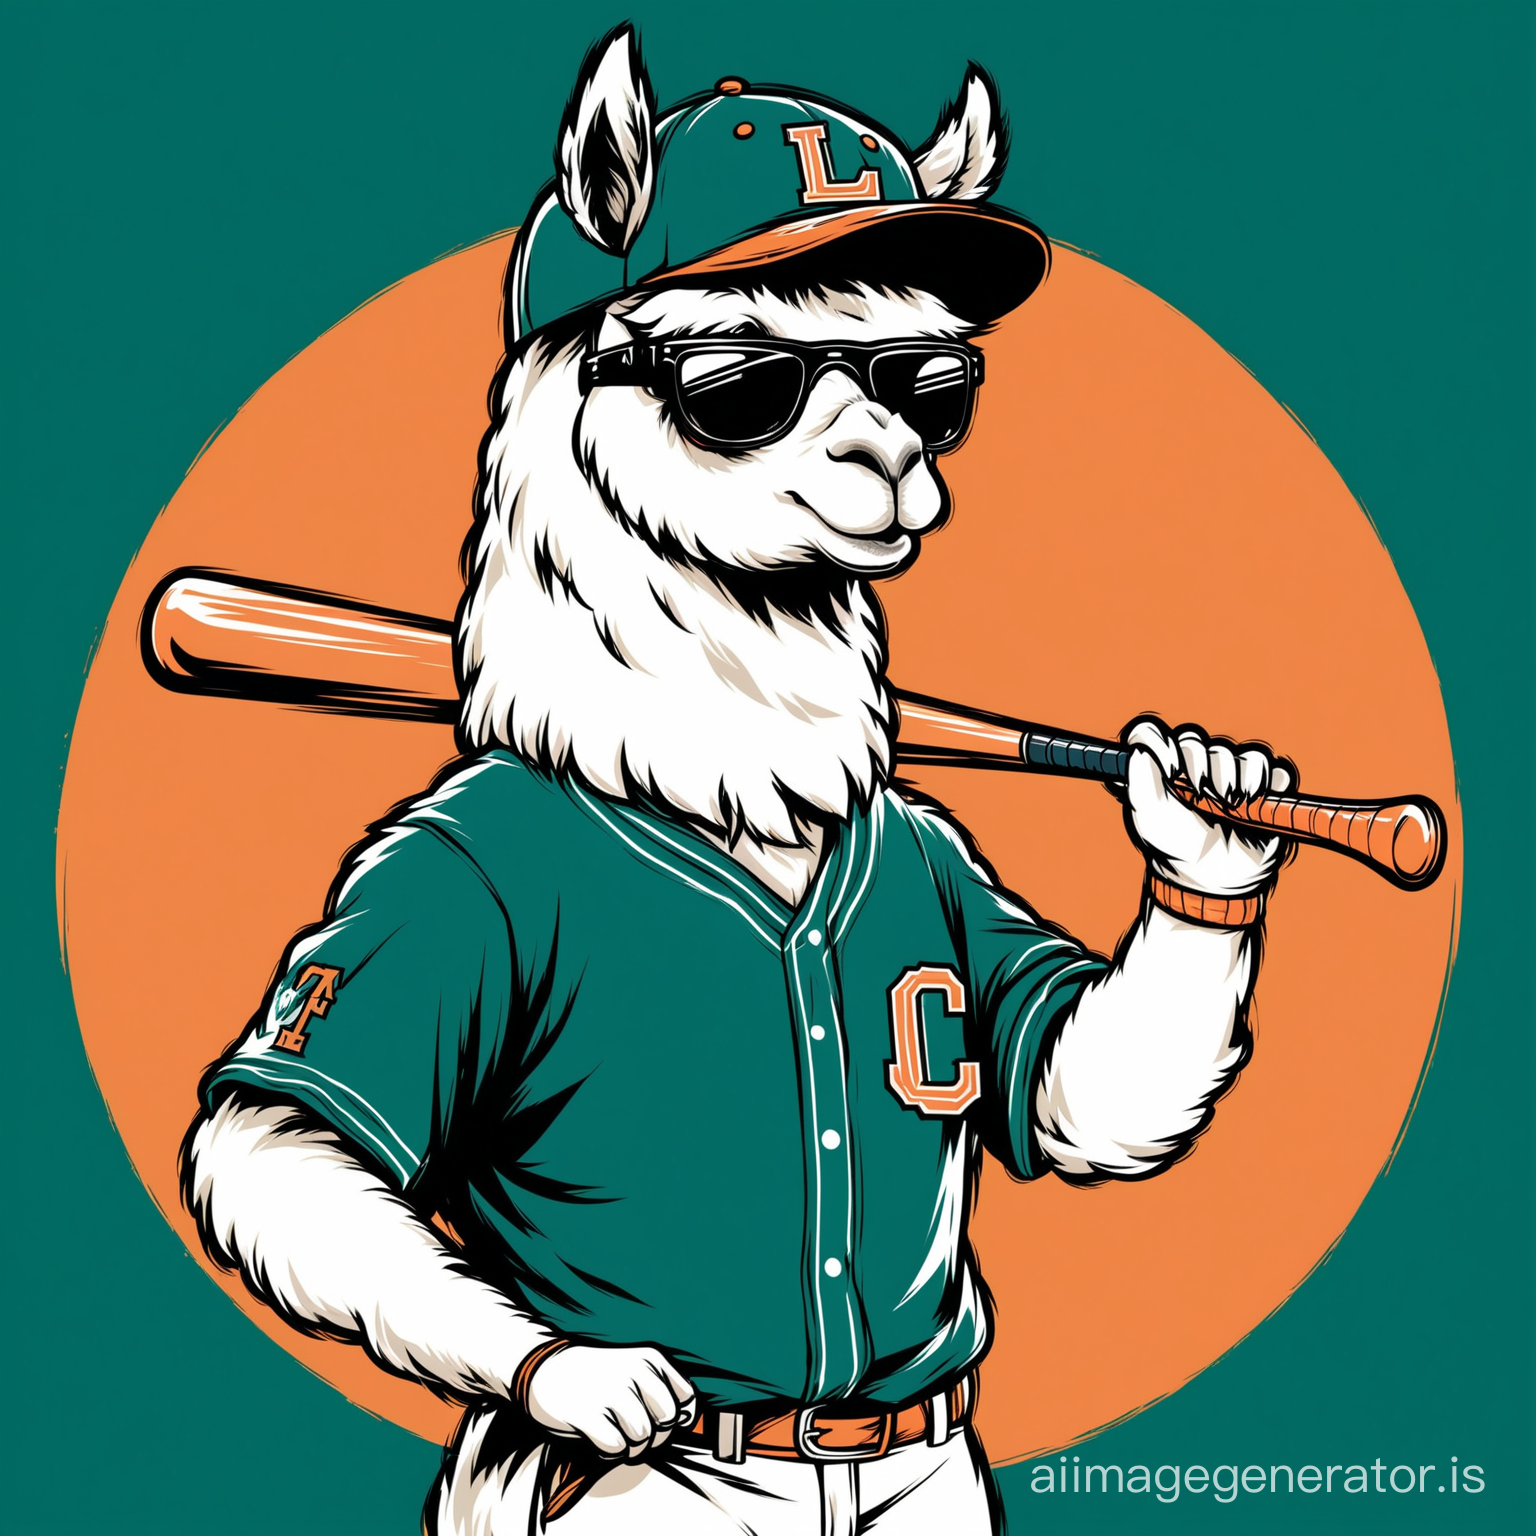 A llama baseball a wearing sunglasses and a baseball hat is depicted, holding a baseball bat and a baseball ball. The background is black. vector design. Vintage color